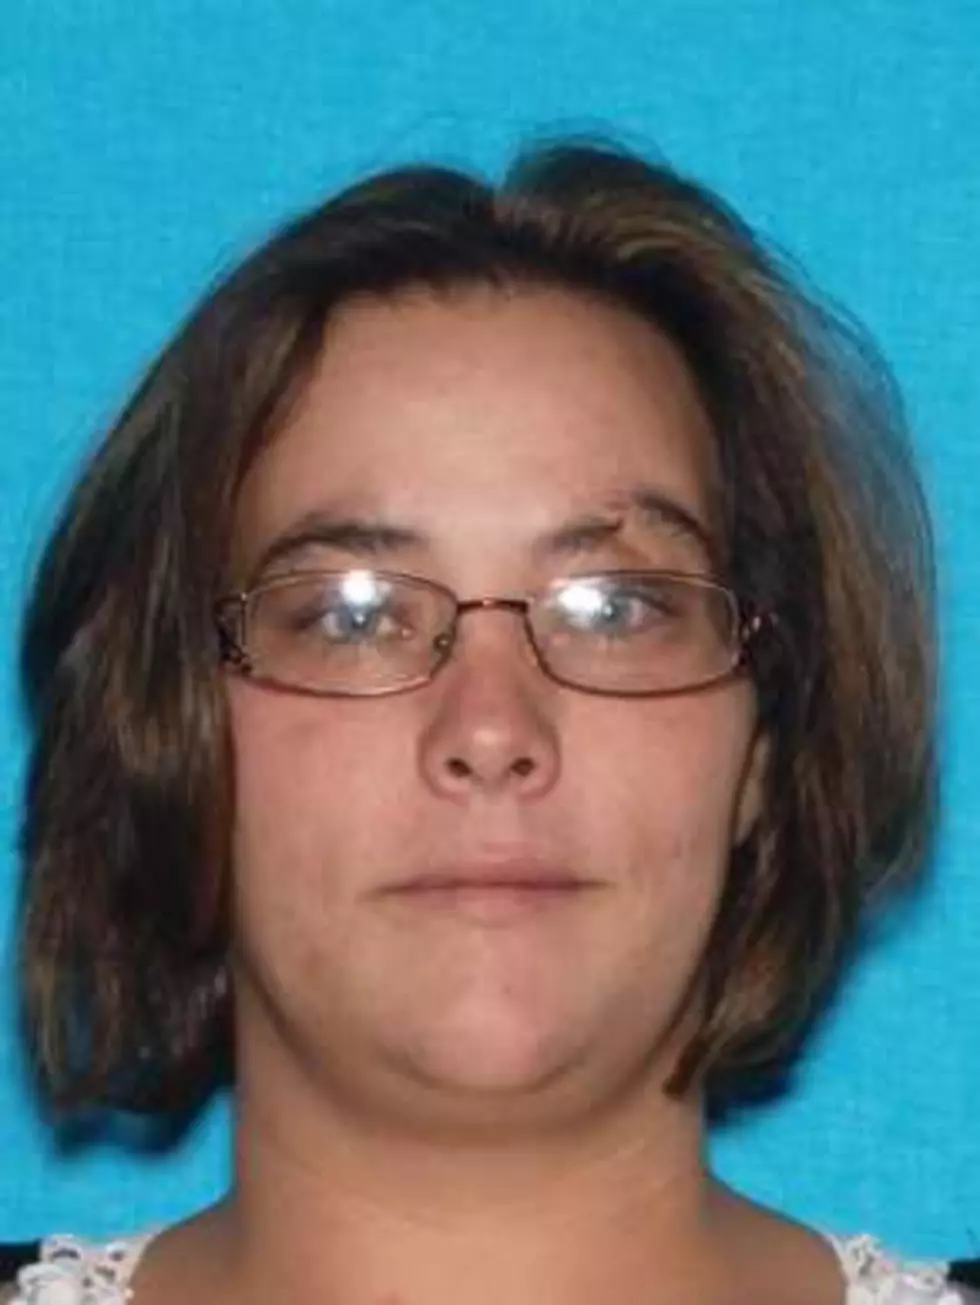 Hindering Prosecution Charges for a Hannibal Woman